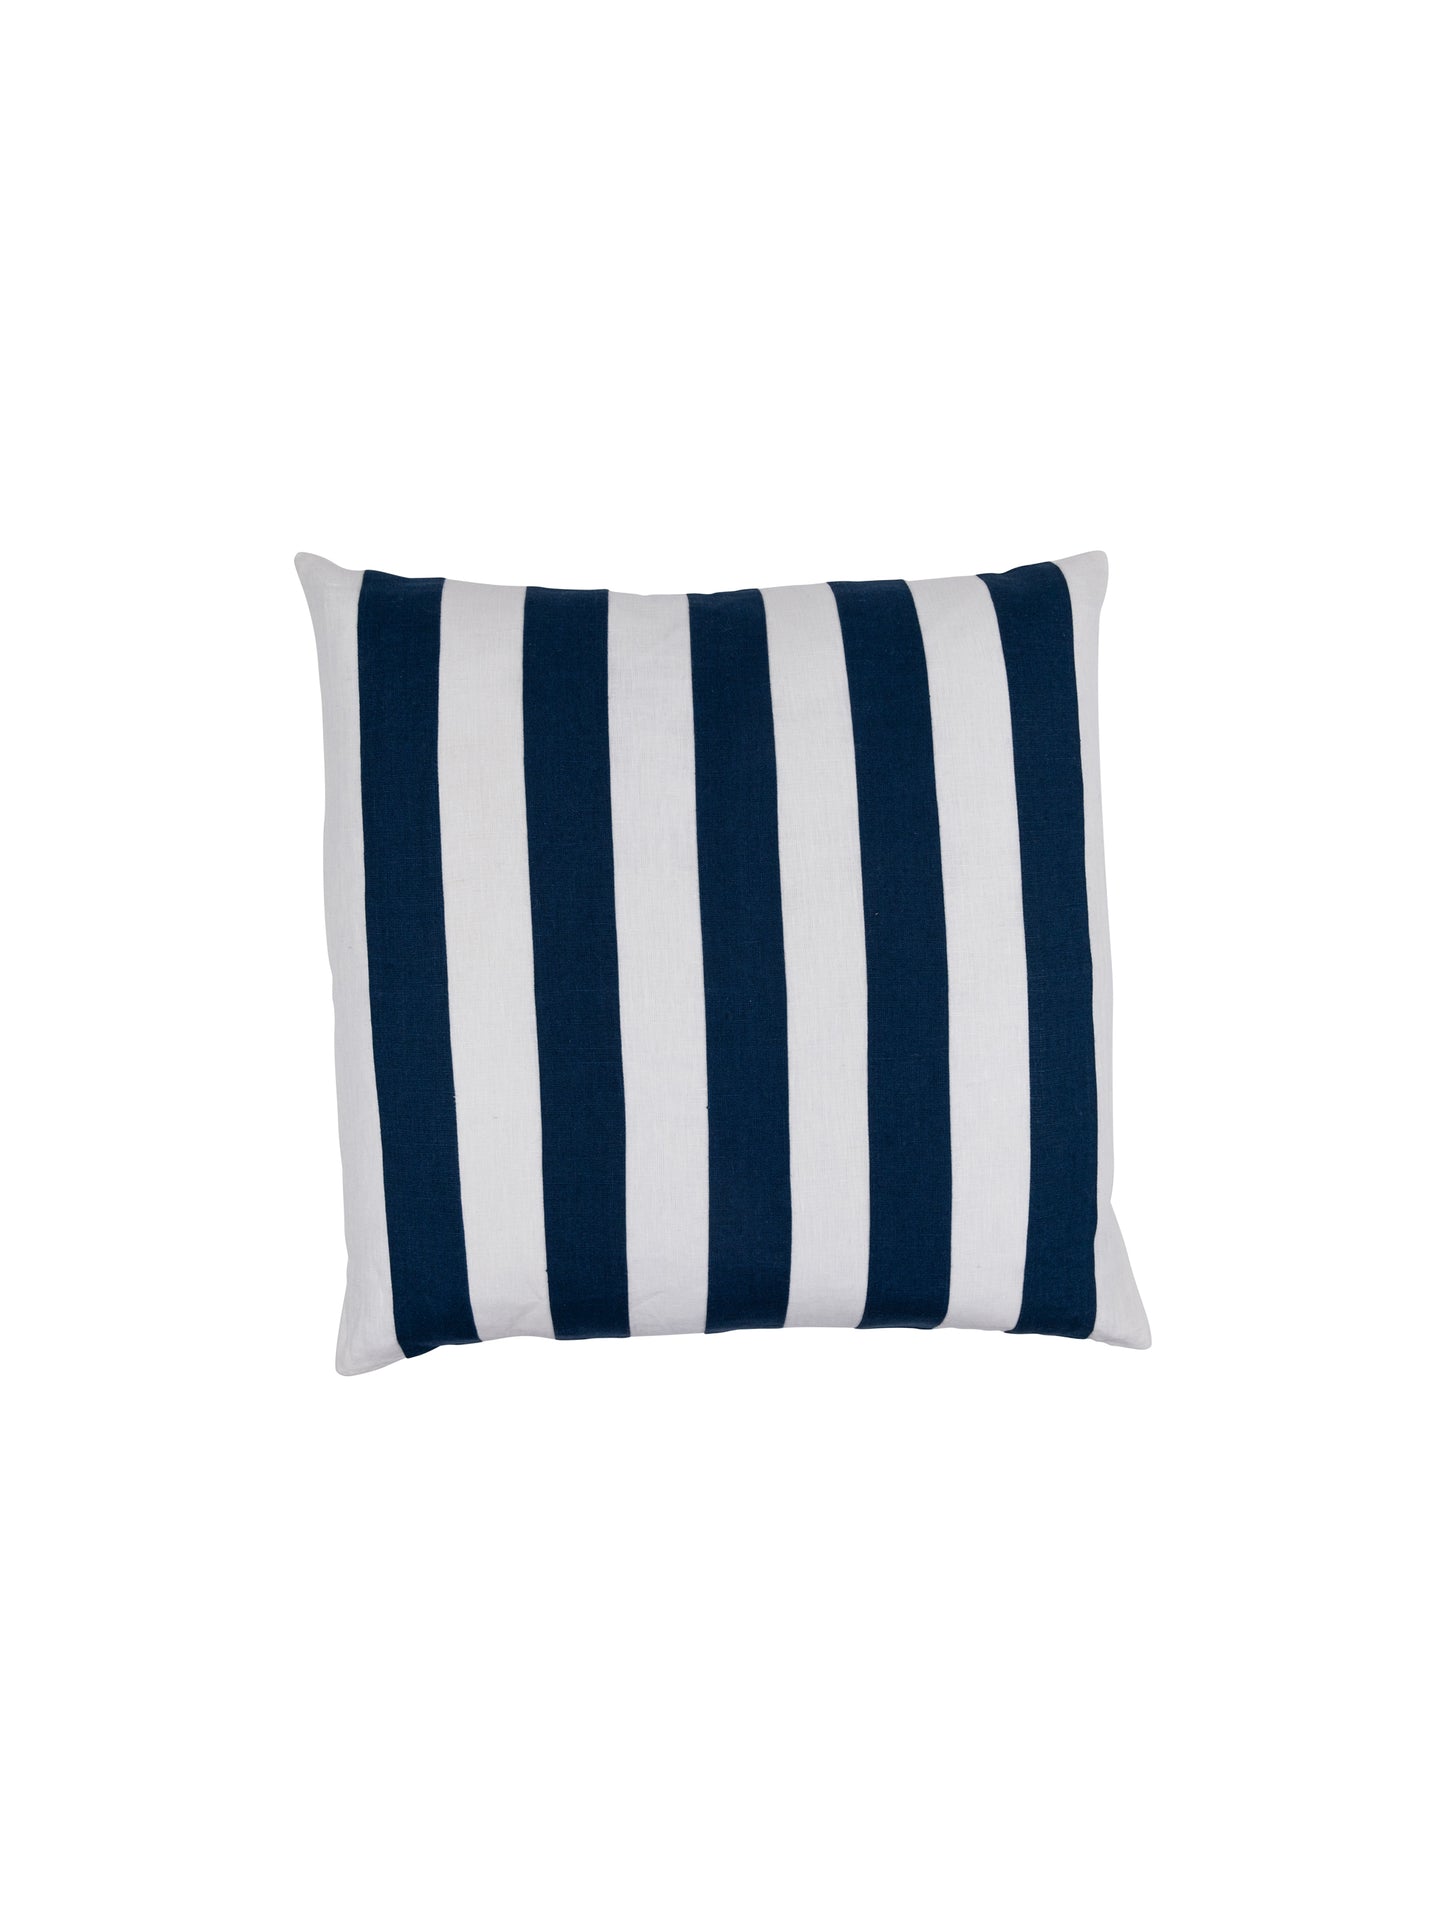 Rugby Stripe Linen Pillow Weston Table